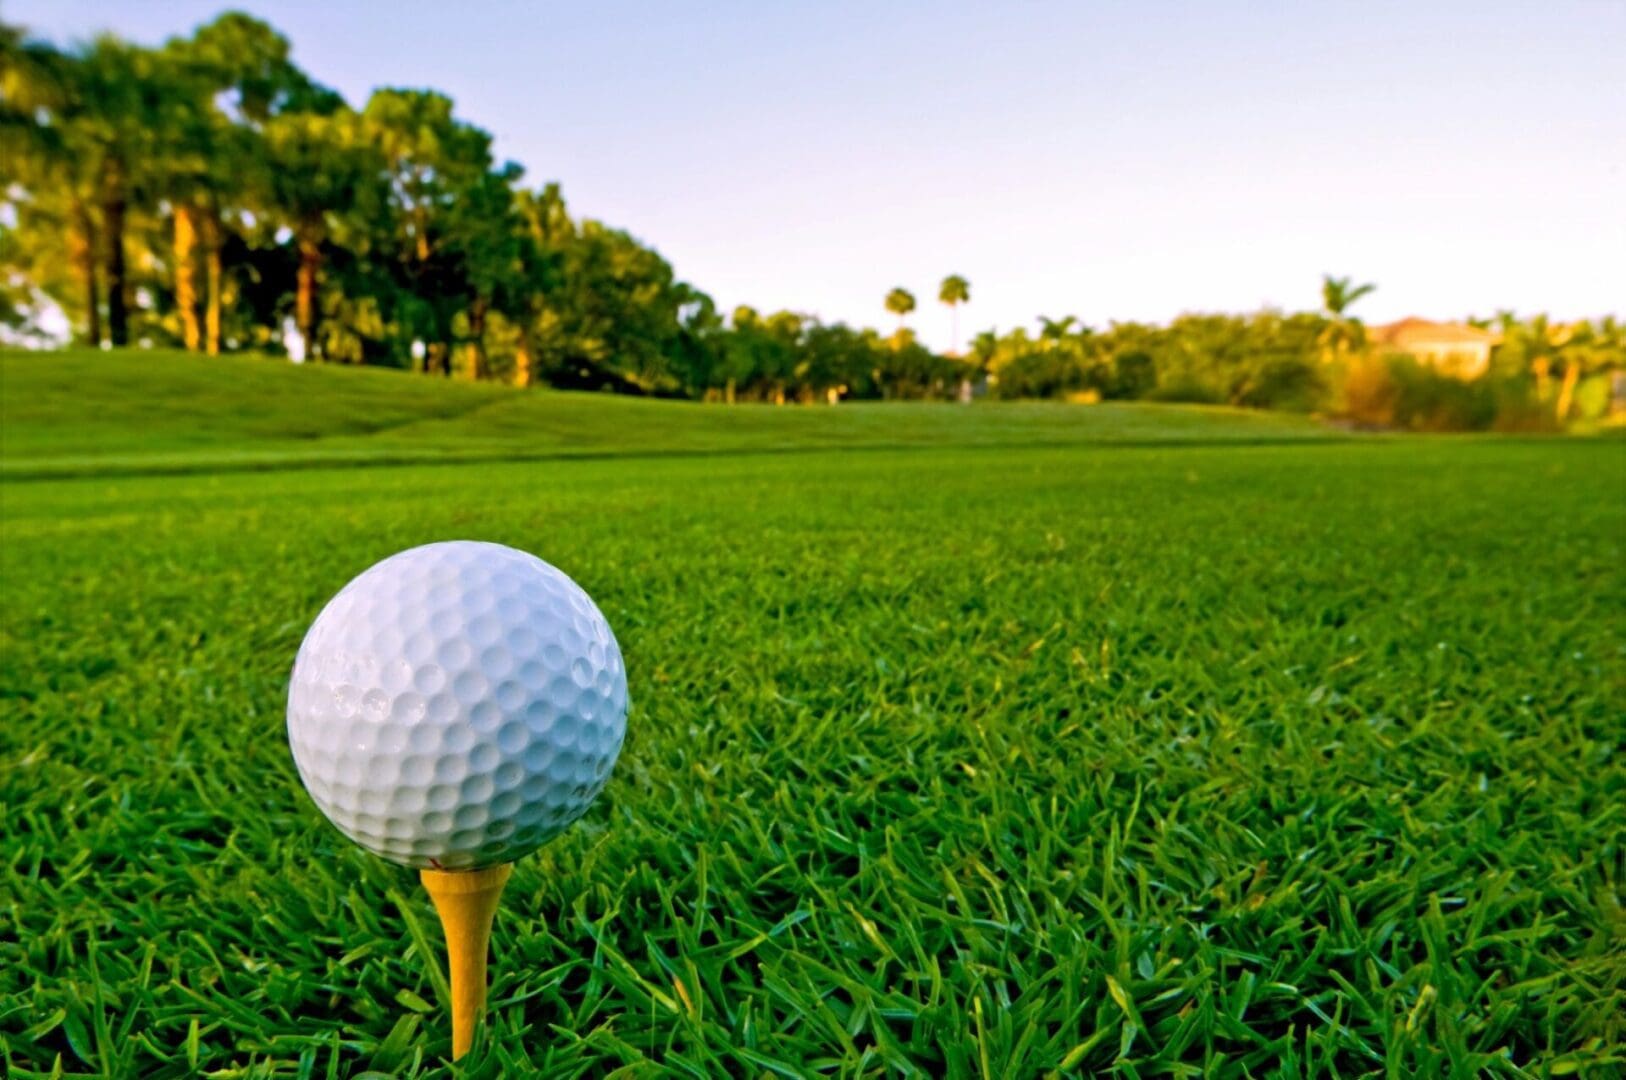 A golf ball sits on a tee in the grass.